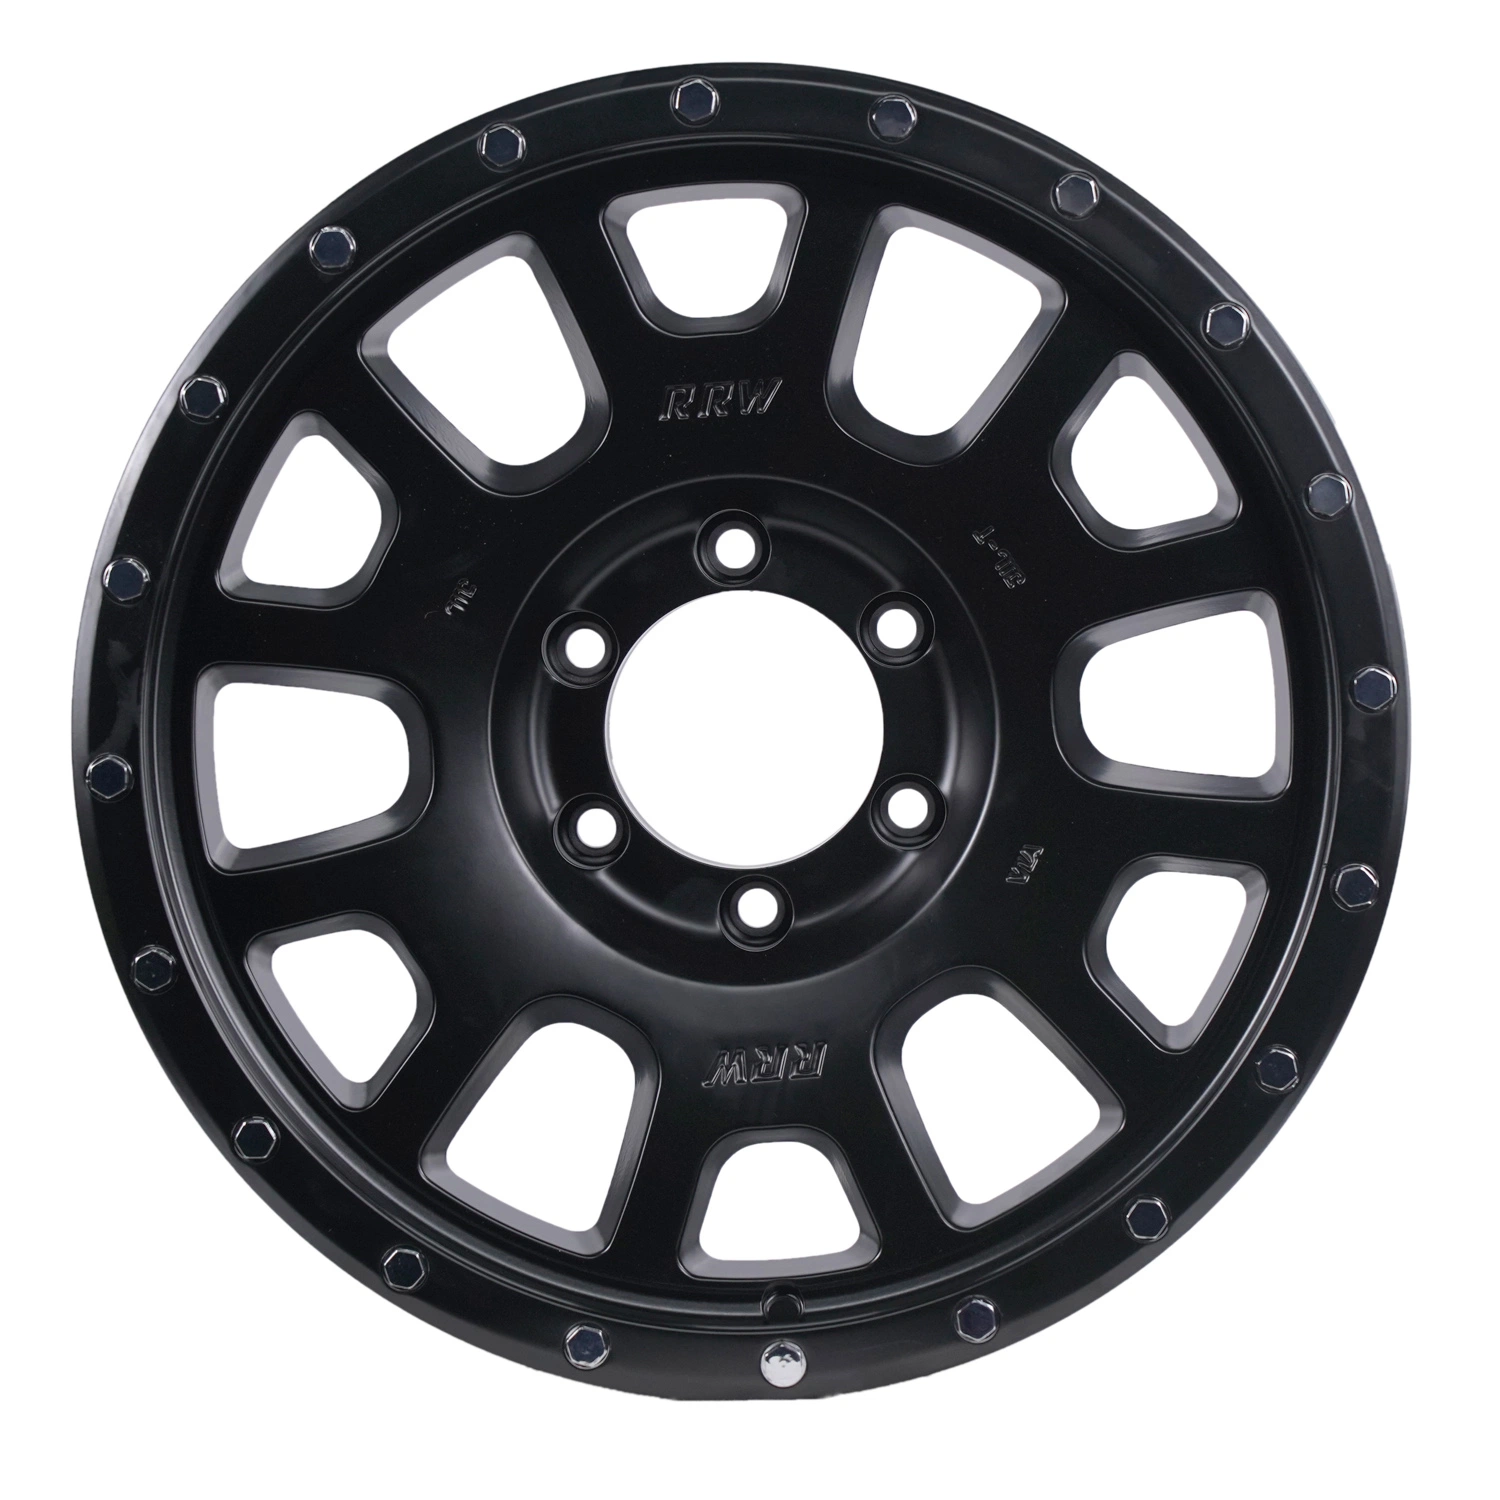 High Strength Rines 18X9 5 Hole Rims 6 Hole 8 Hole off-Road off Road Tires 4X4 Wheels